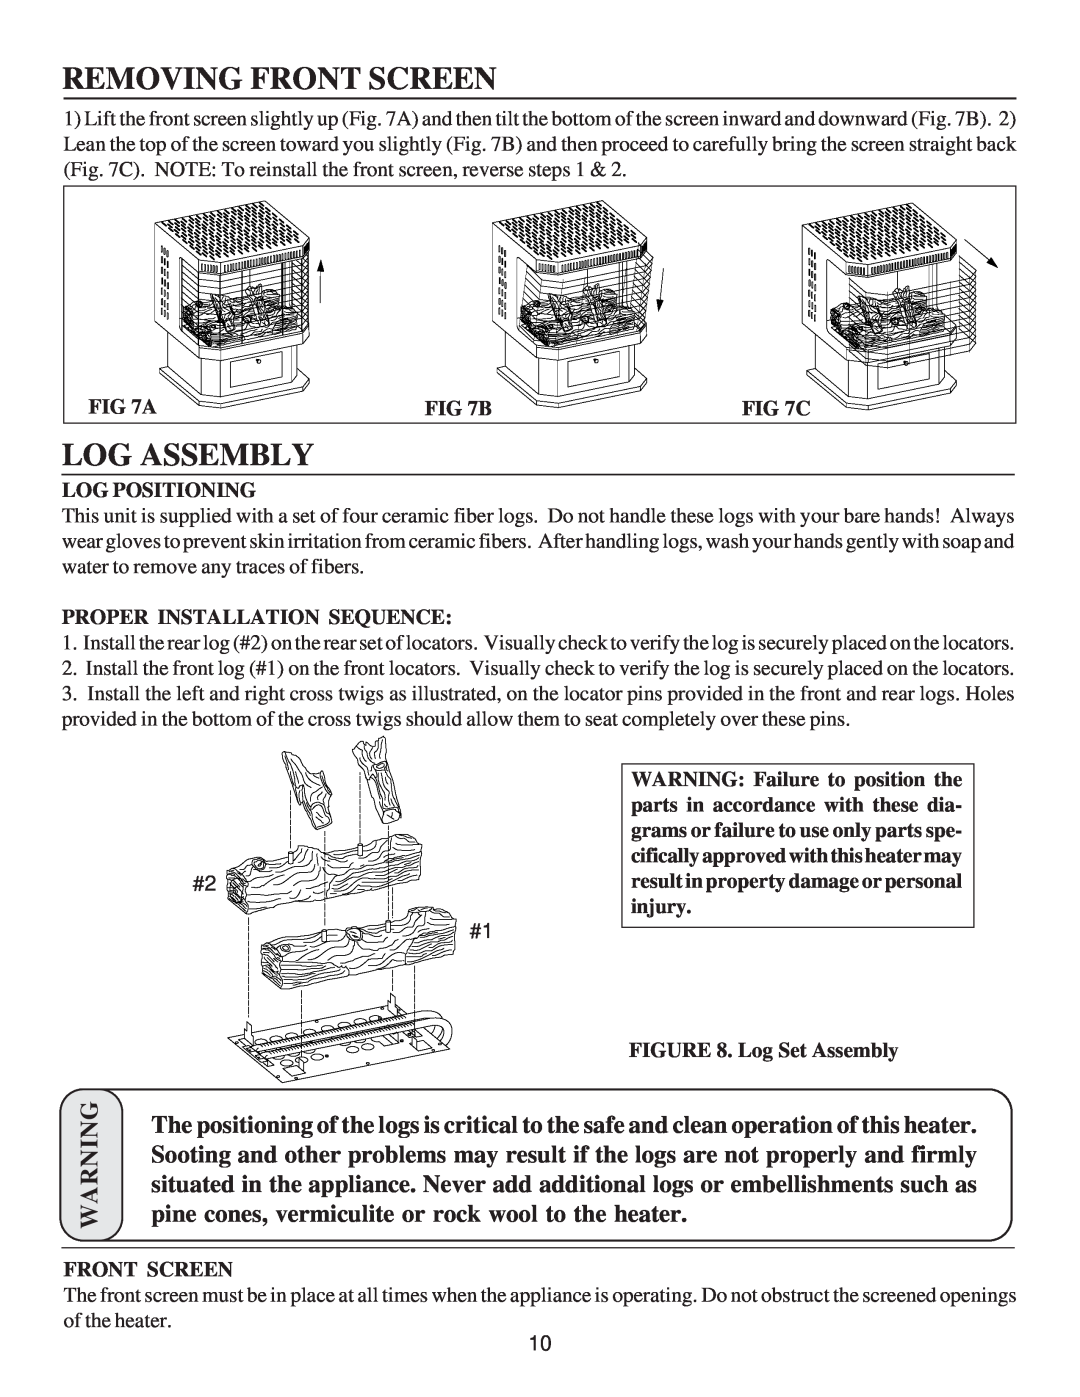 United States Stove G9843N manual Removing Front Screen, Log Assembly, B, C, Log Positioning, Proper Installation Sequence 